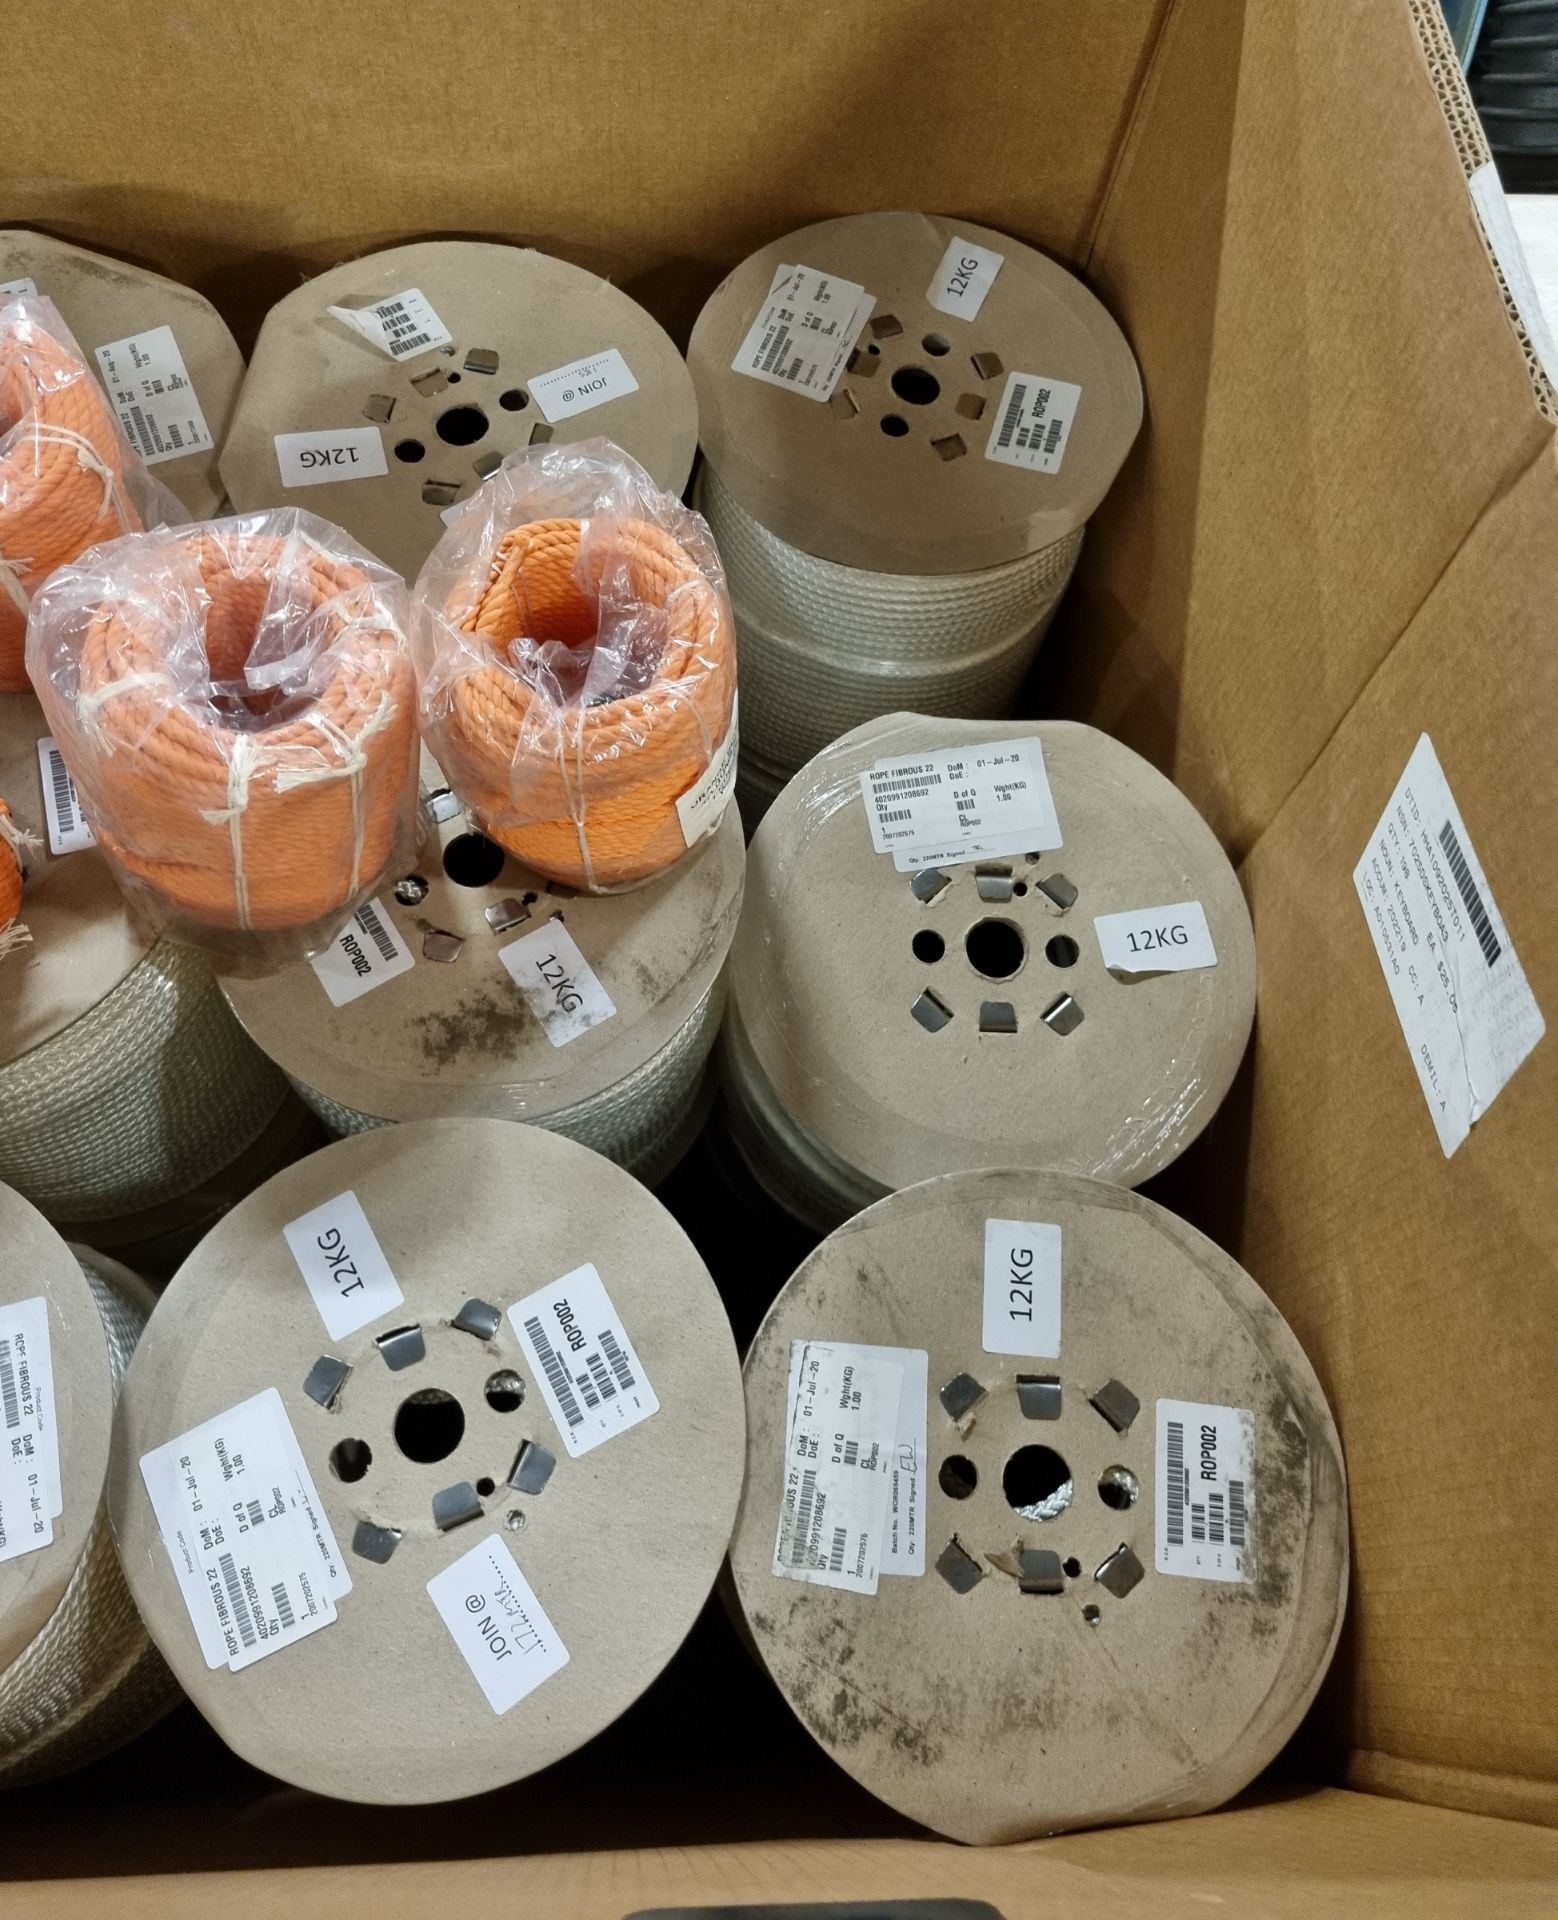 23x reels of white Poly fibrous rope - 22m x 9m, 4x reels of orange buoyant rope - 50 yards - Image 2 of 7